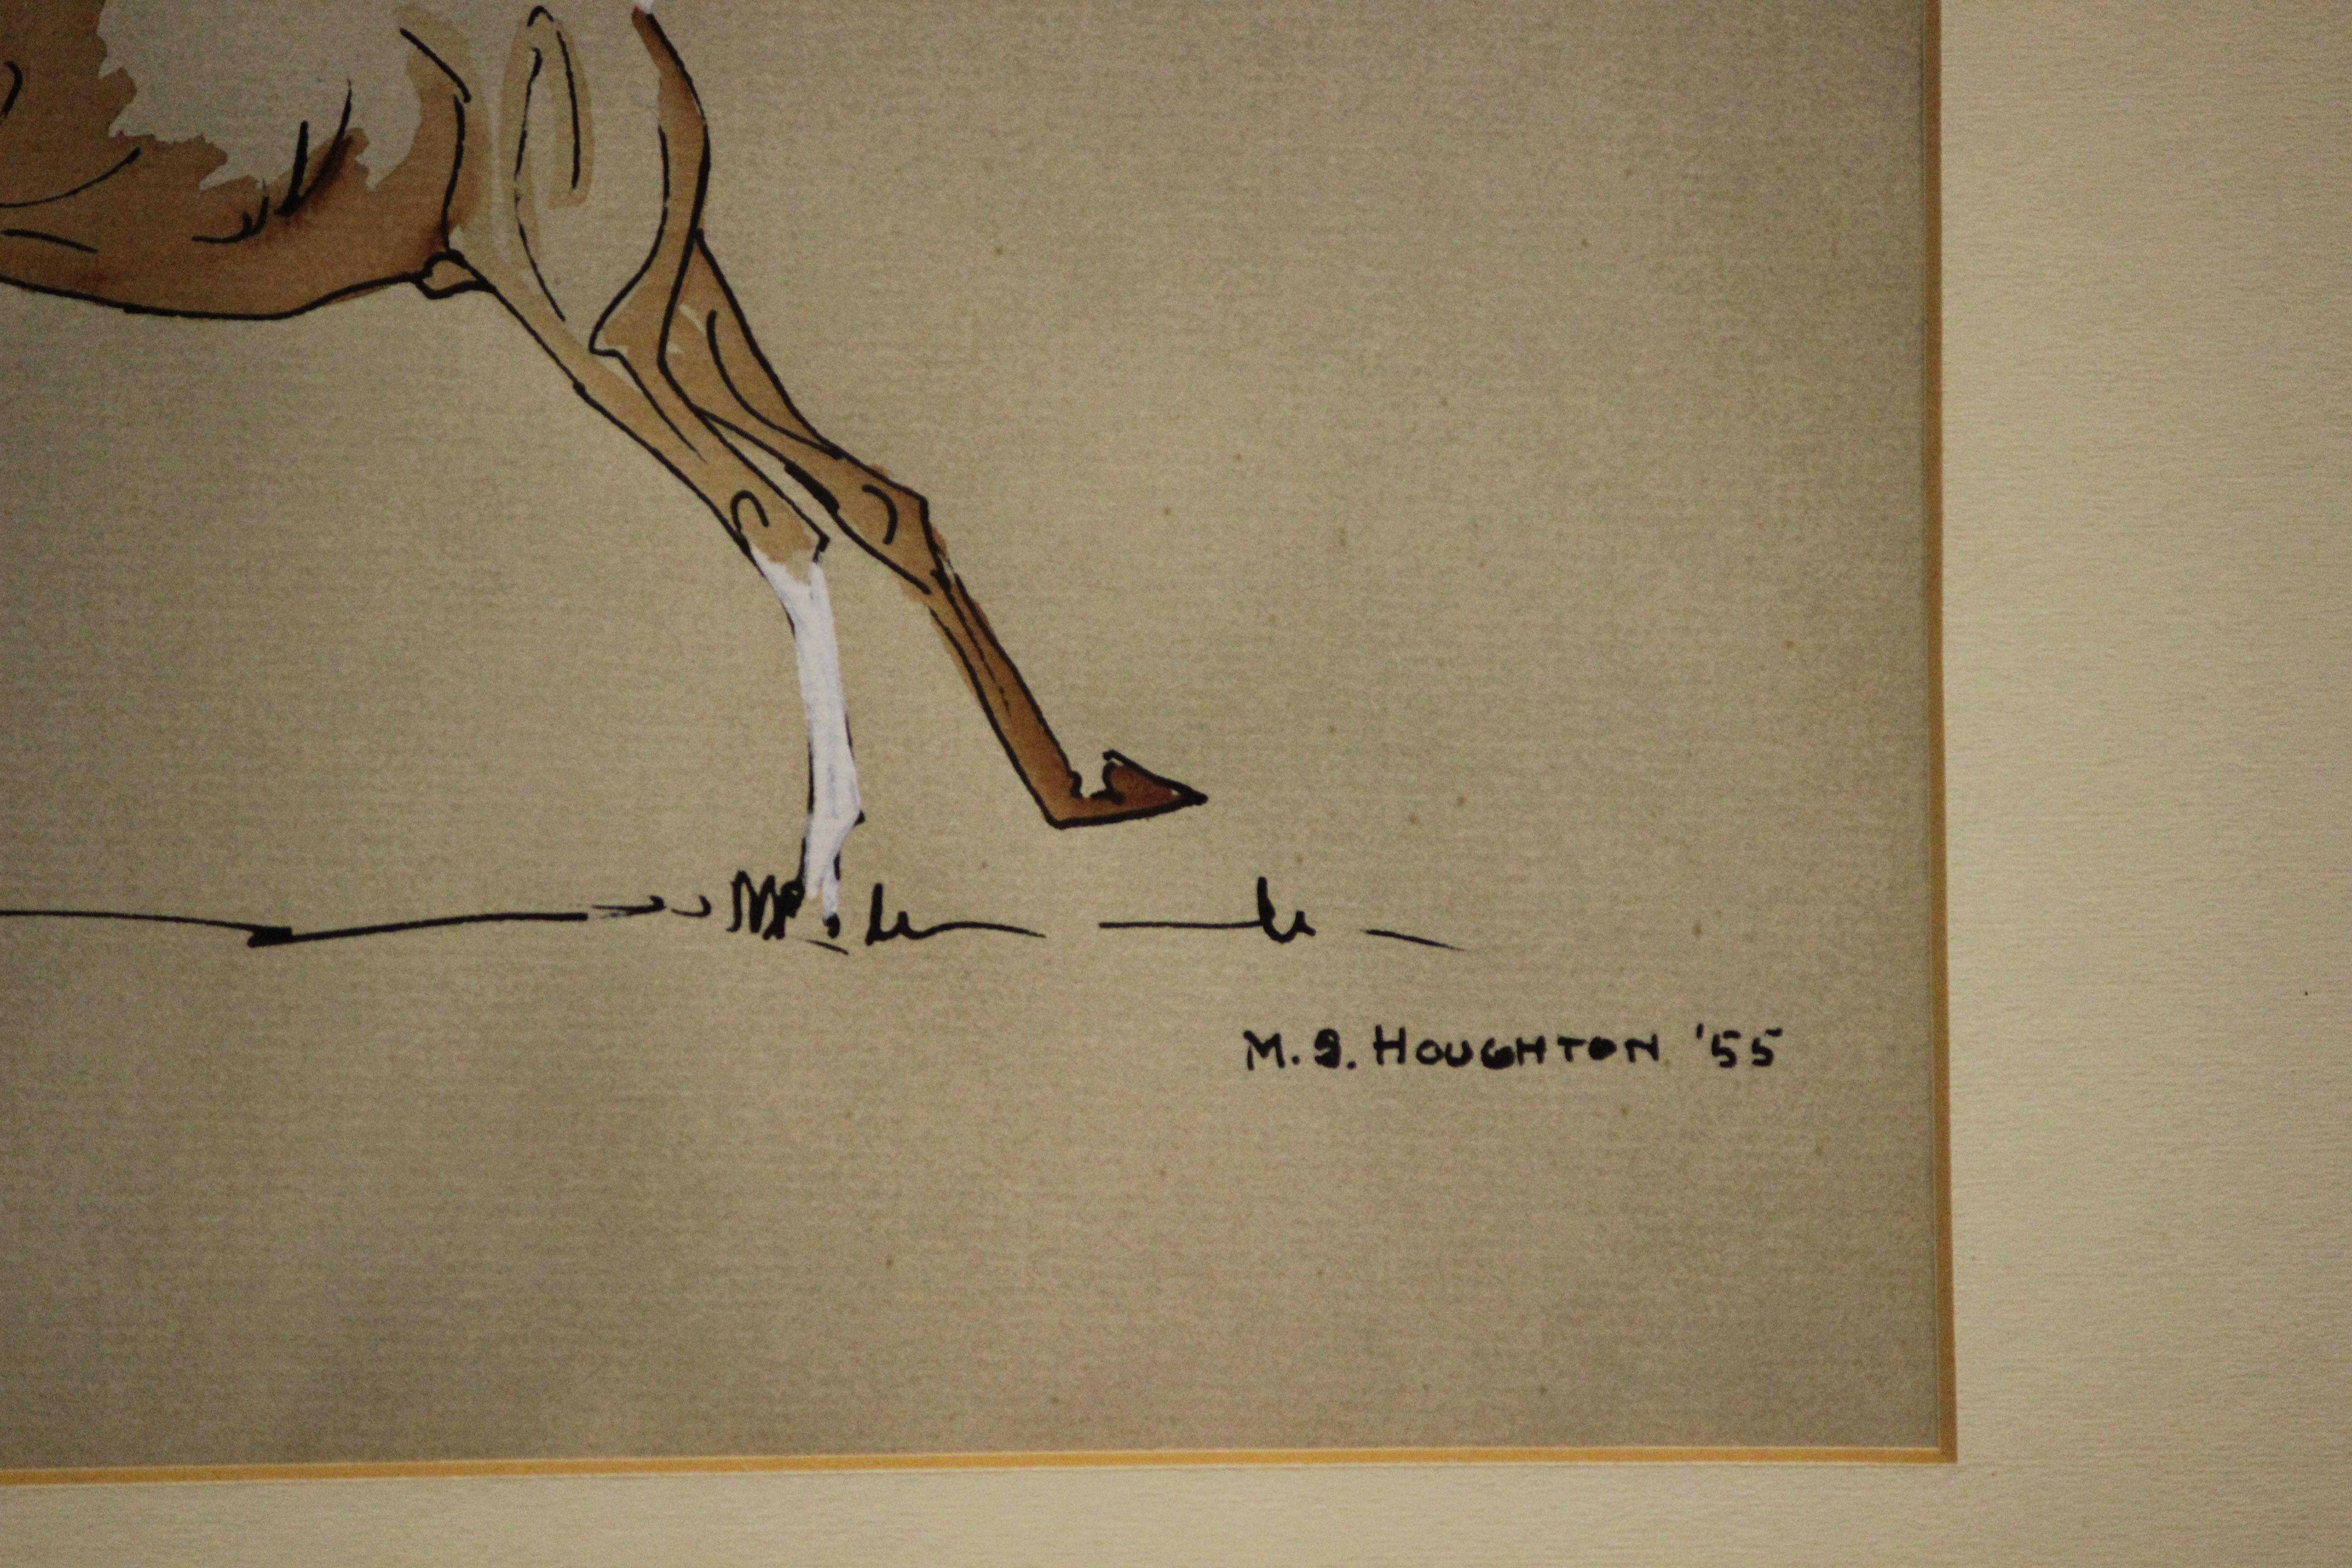 Charming watercolour w/ gouache highlights depicting a playful colt signed M.S. Houghton & dated (19)55 (LR)

Art Sz: 8 3/4